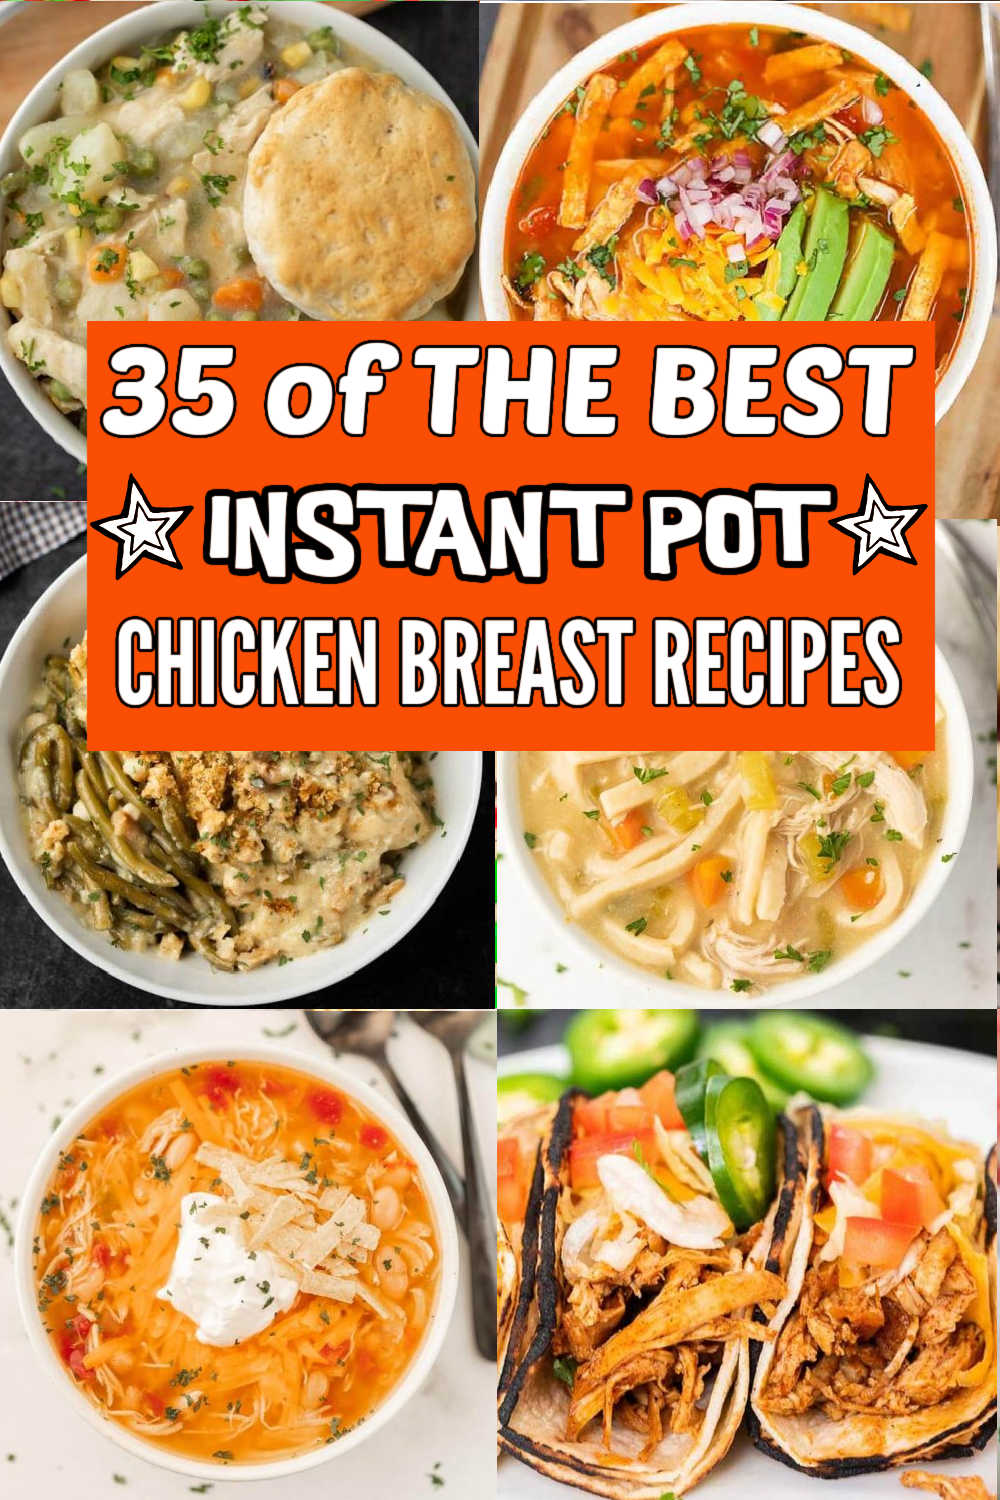 These 45 Instant Pot Chicken Recipes come together easily and you have a home cooked meal in minutes. Delicious and easy ingredients. The instant pot can cook a meal from frozen usually within about 10 to 20 minutes. Cooking chicken breast is the easiest and my favorite meat to cook in the instant pot. #eatingonadime #instantpotchickenbreastrecipes #chickenbreastrecipes #instantpot